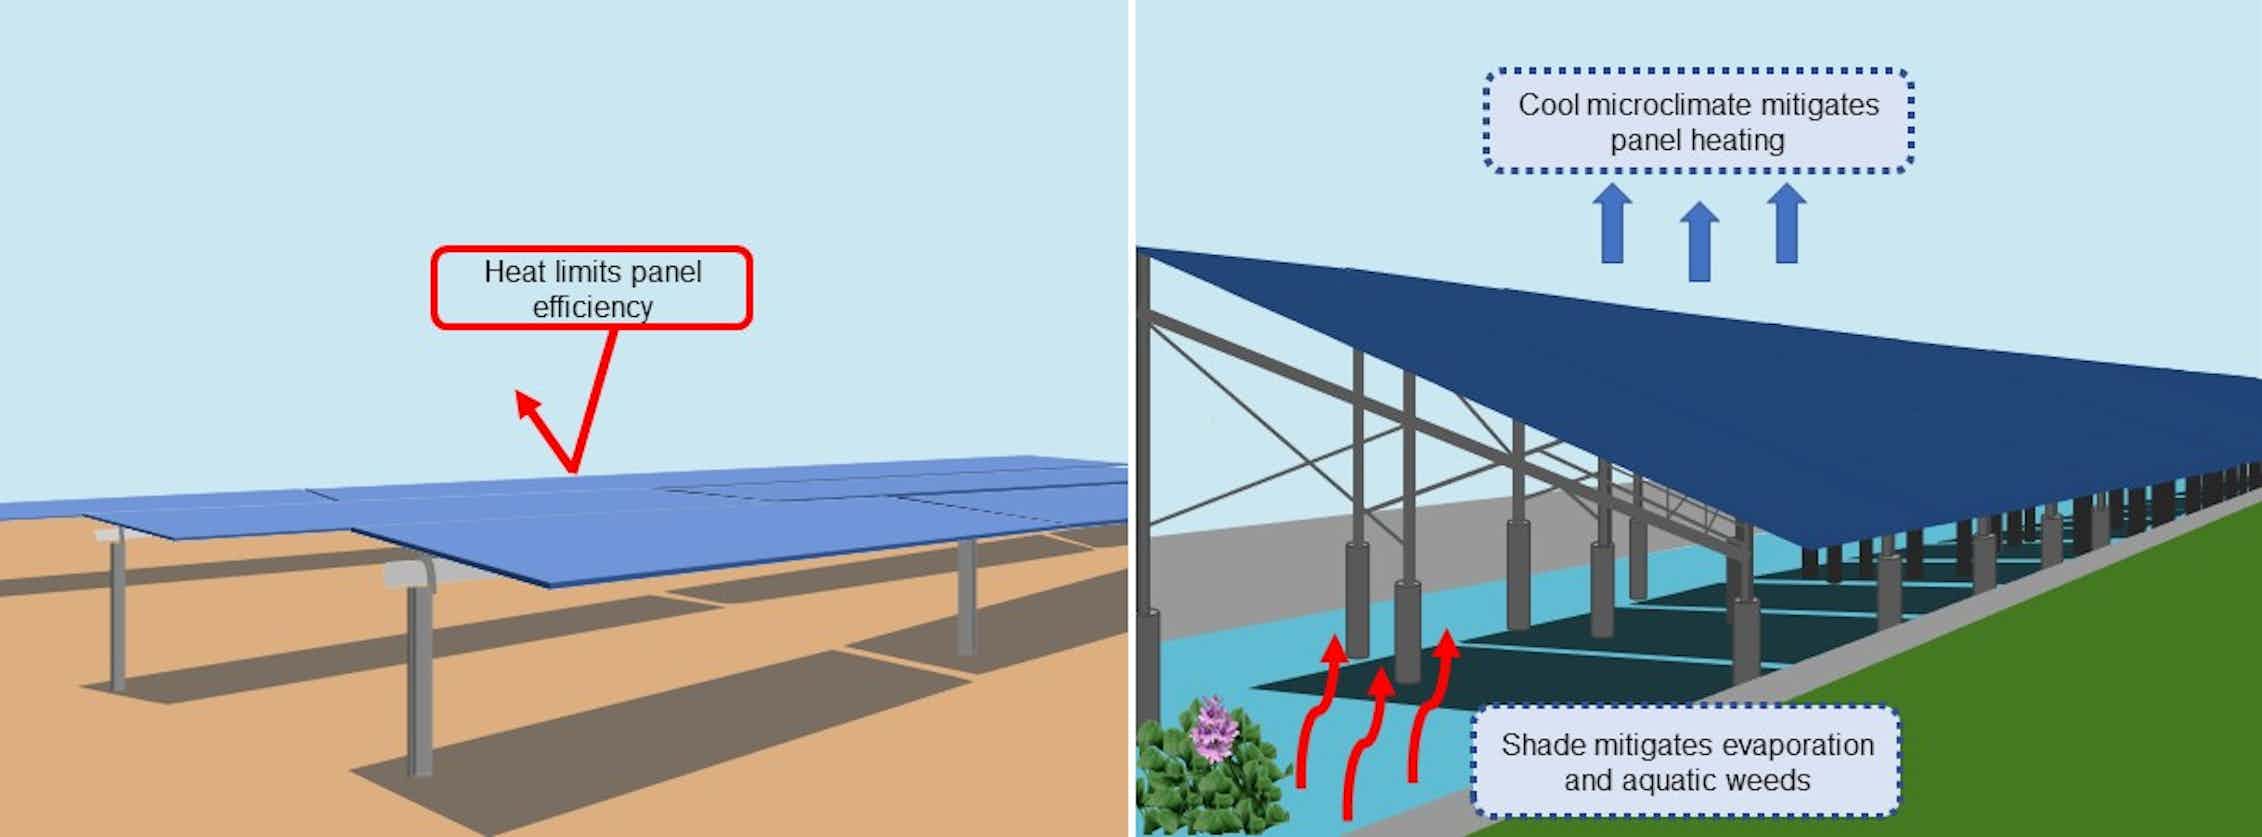 installing-solar-panels-over-california-s-canals-could-yield-water